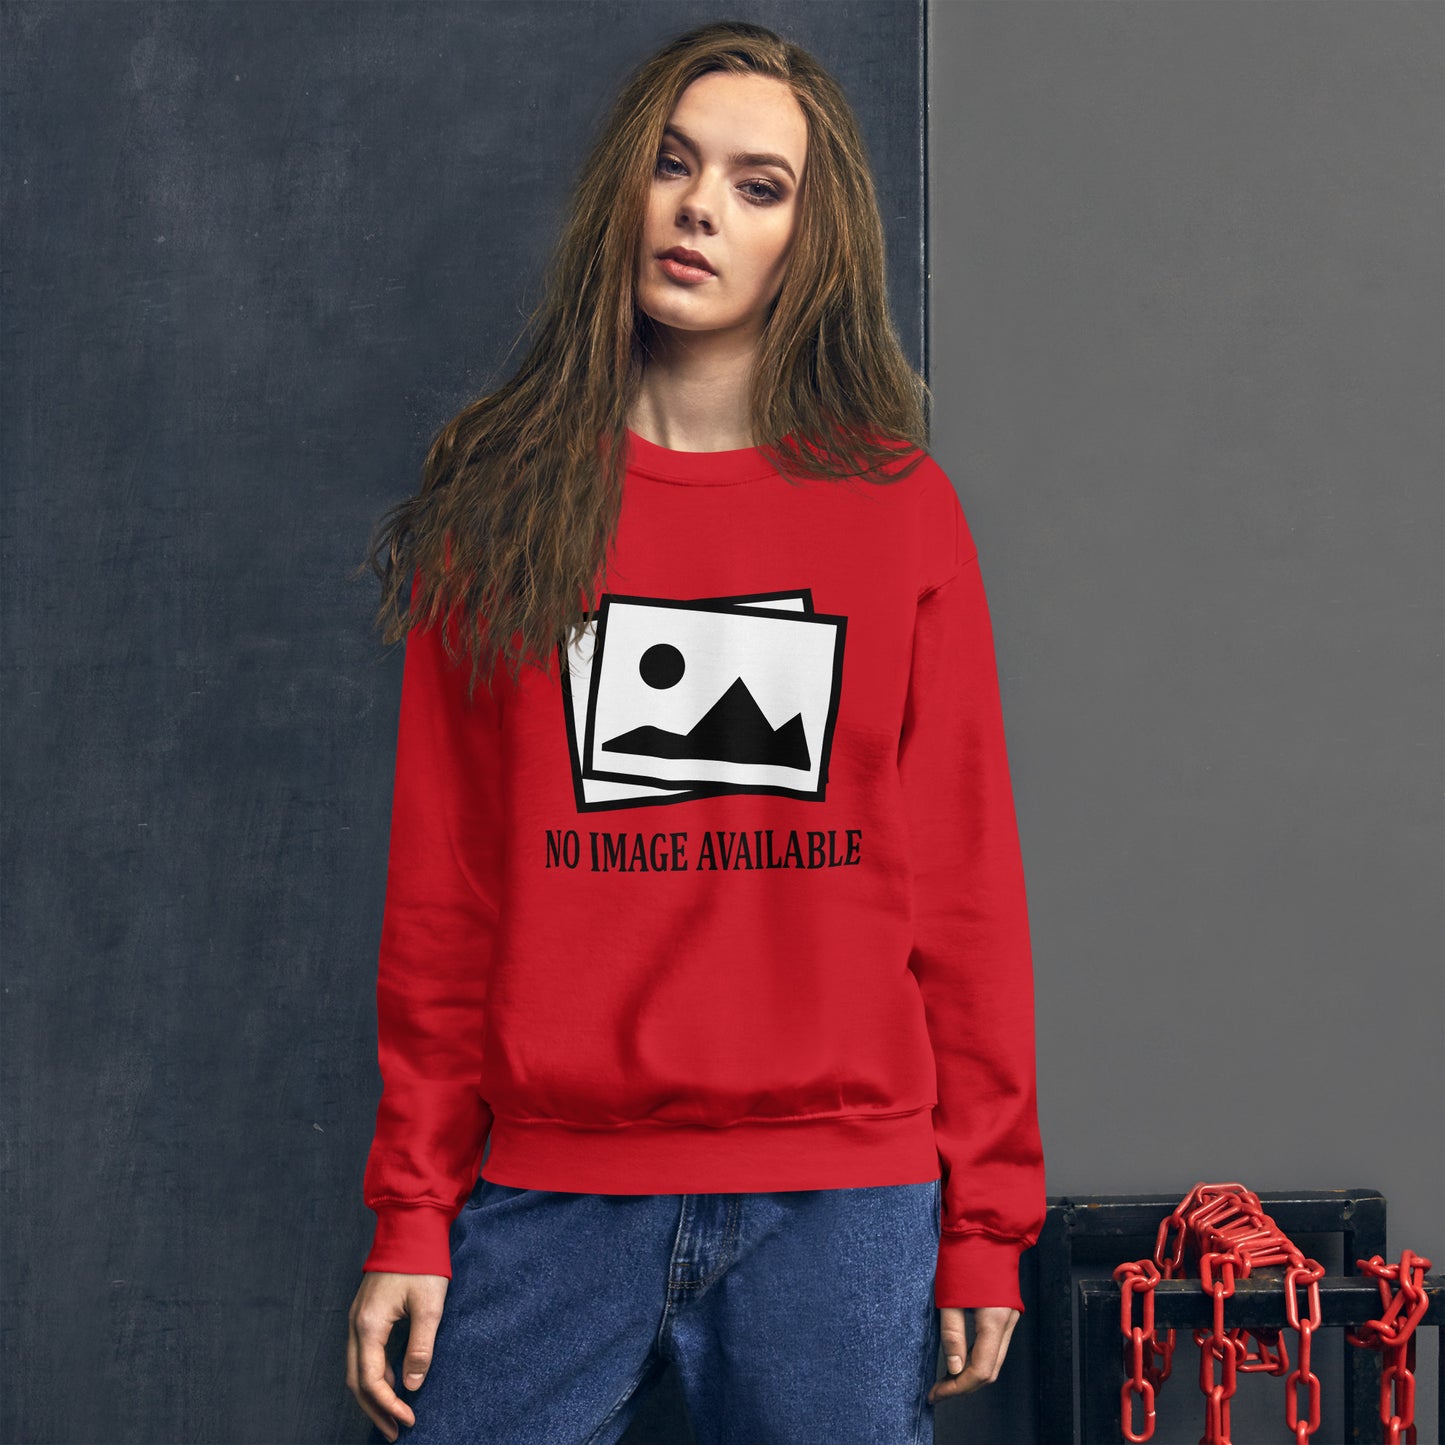 Women with red sweatshirt with image and text "no image available"